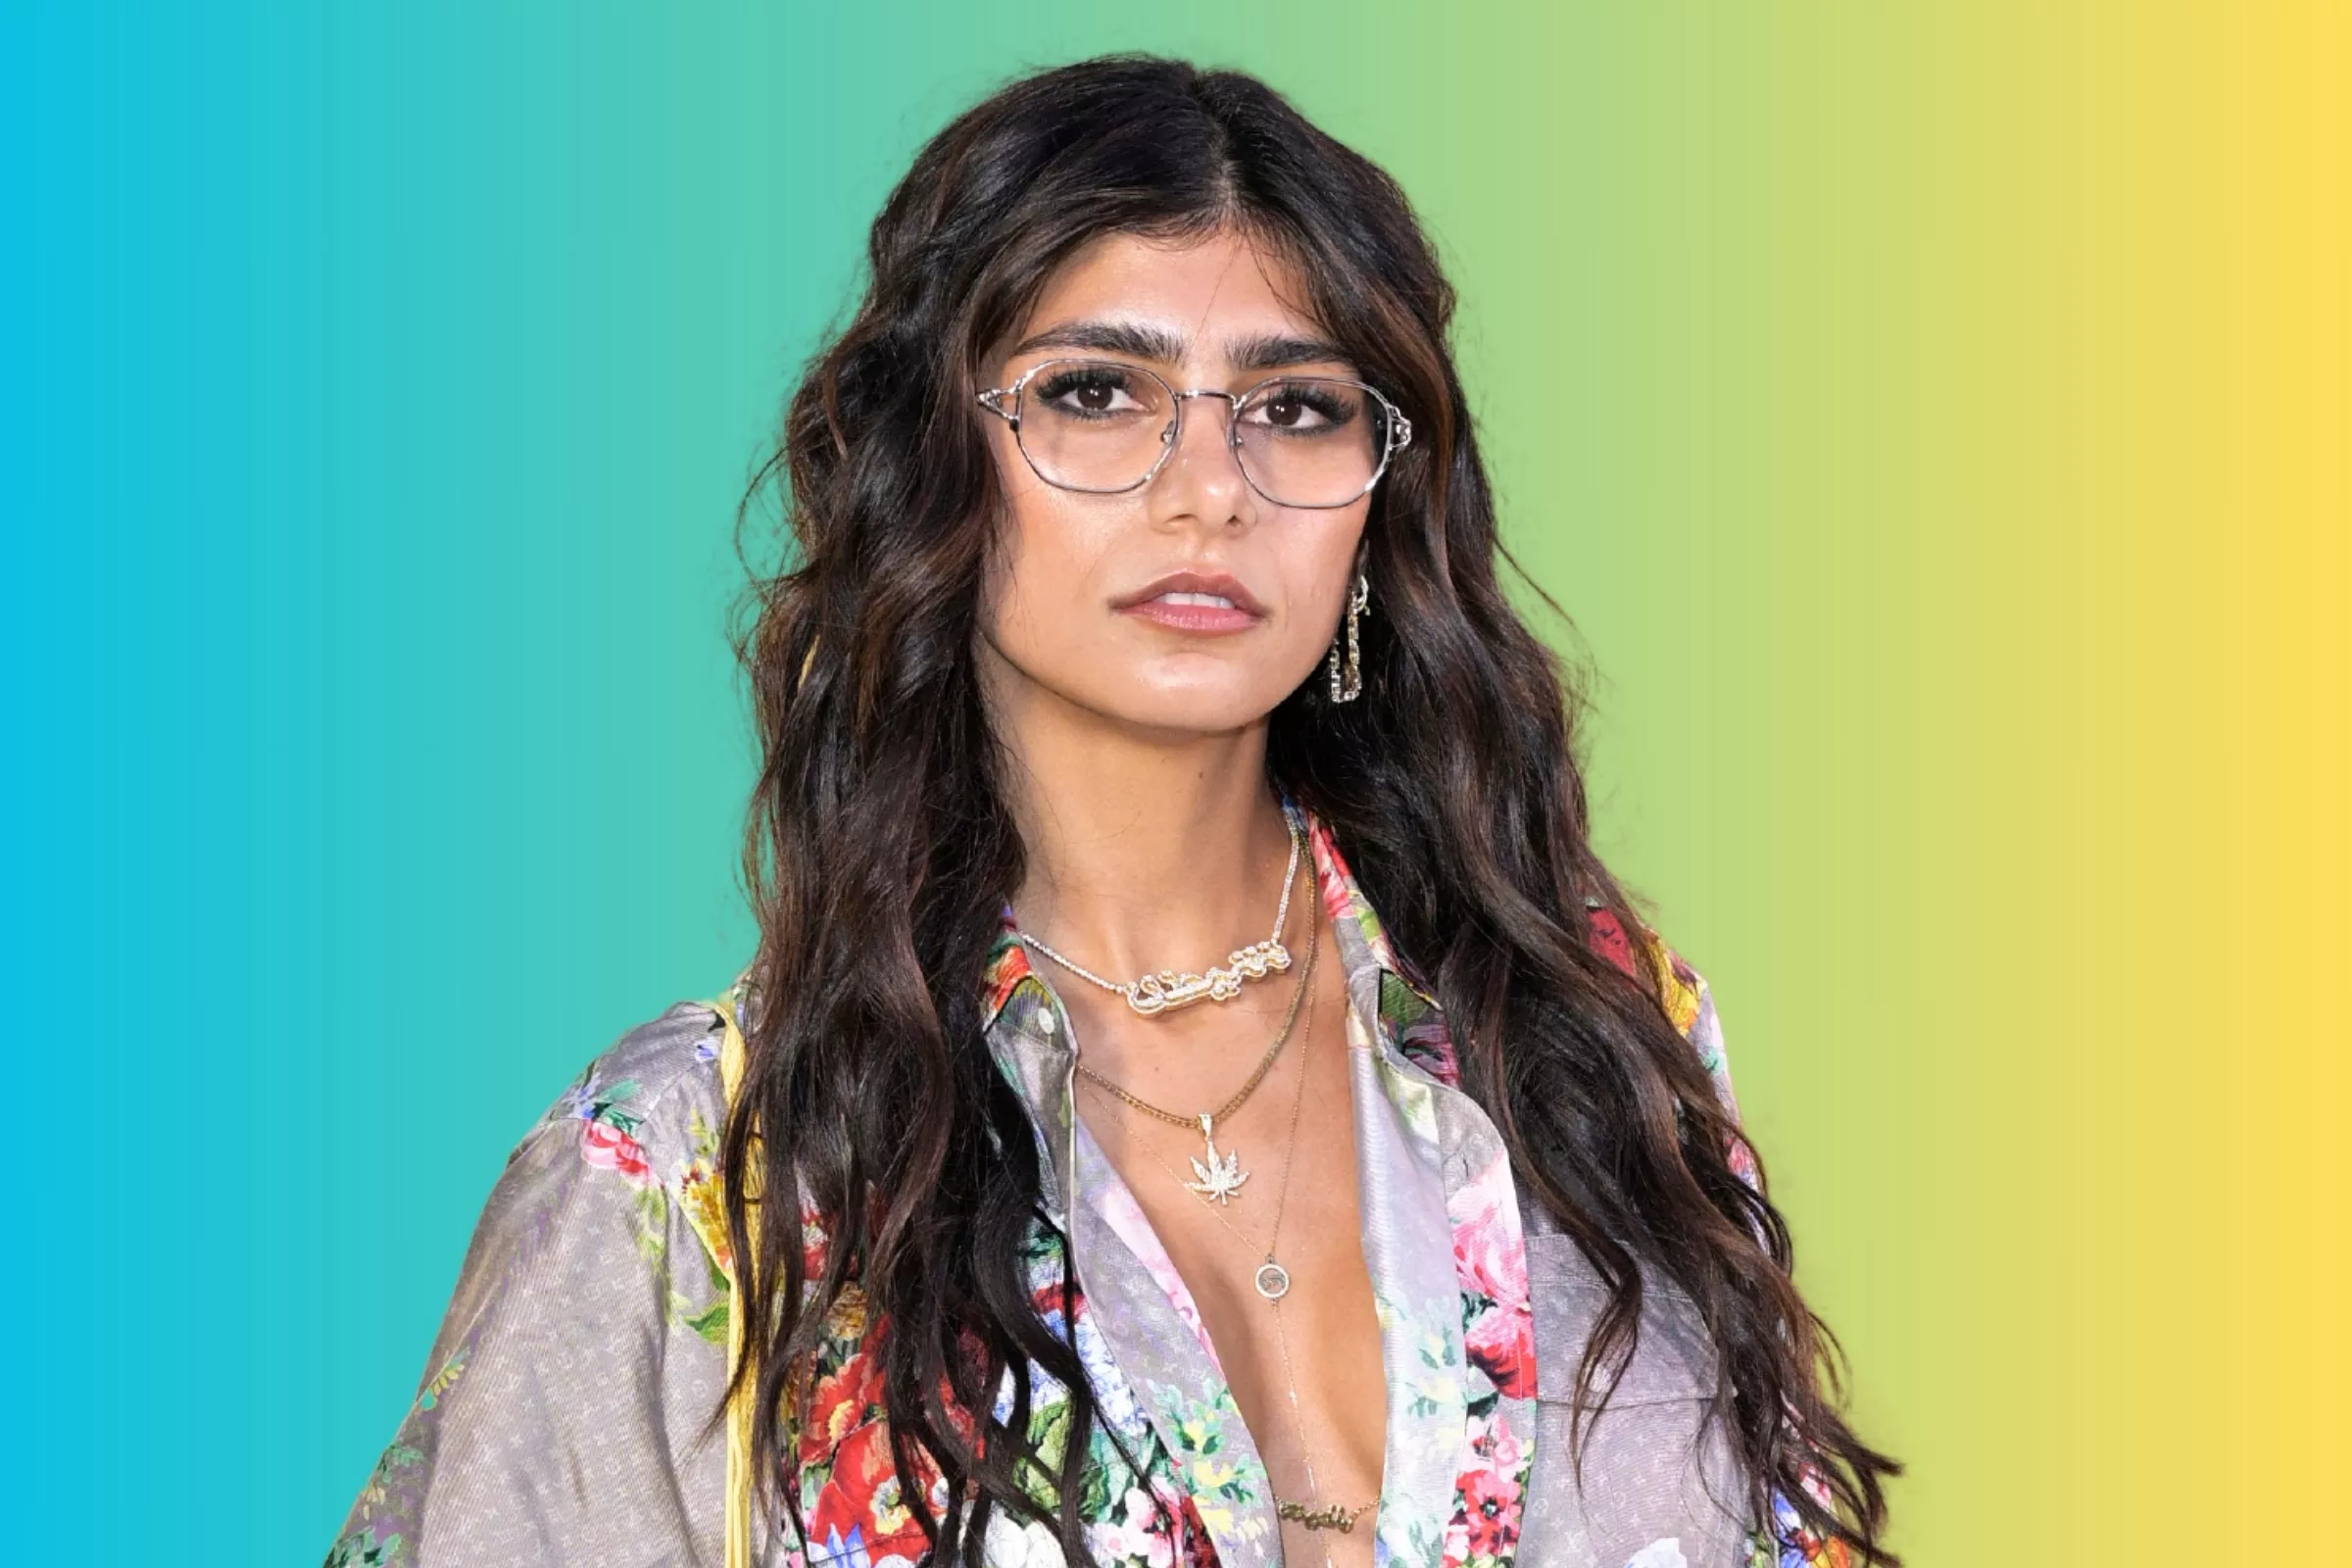 dale dieter recommends mia khalifa about donald trump pic